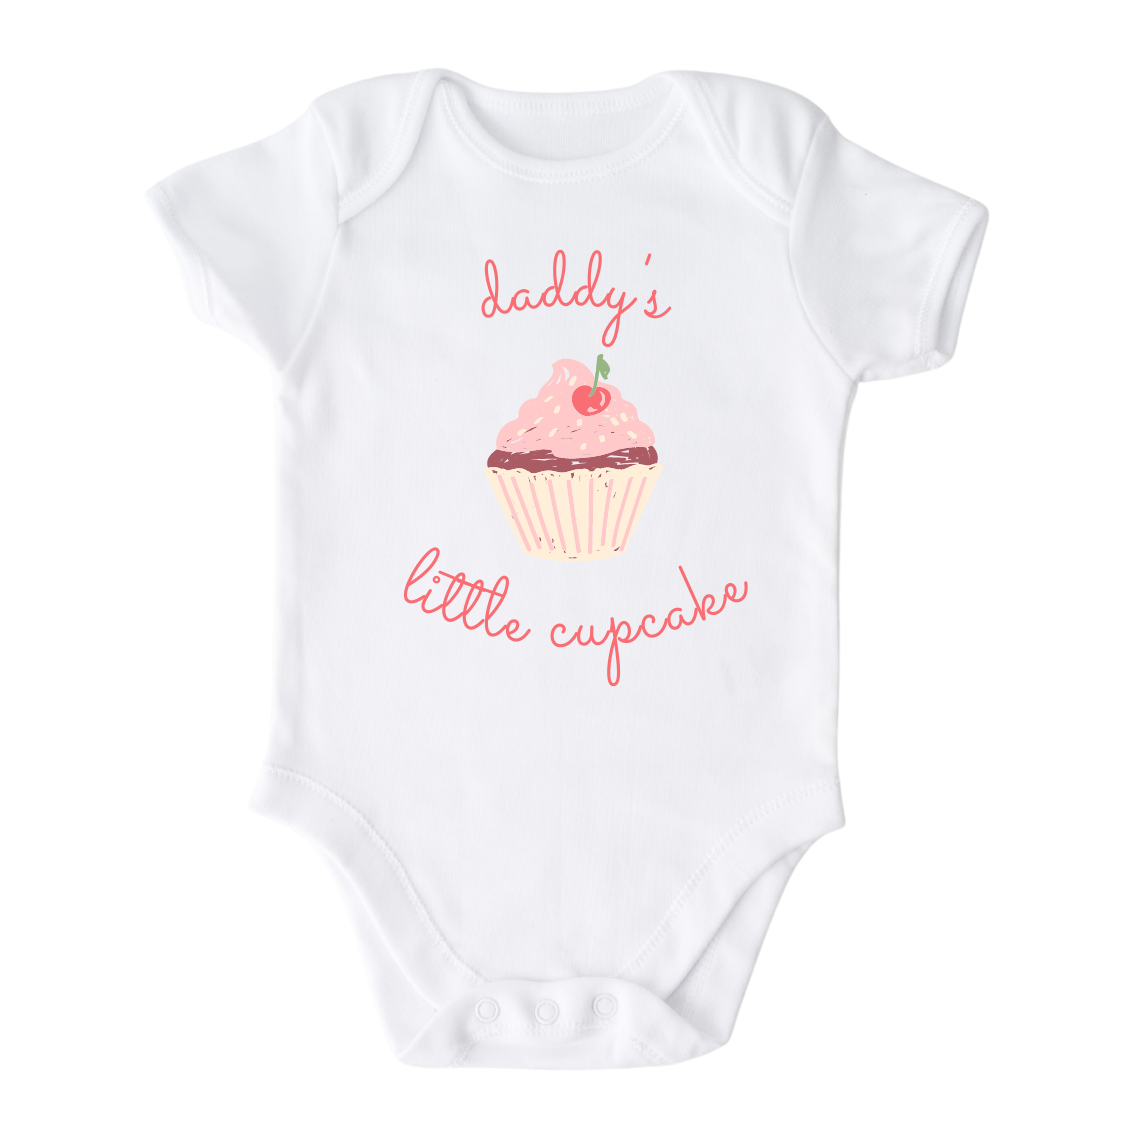 Baby Bodysuit - Cute cupcake graphic print with customizable text - 'Daddy's Little Cupcake' on a kid t-shirt and baby onesie. High-quality and vibrant design for adorable children's clothing. Perfect gift option.